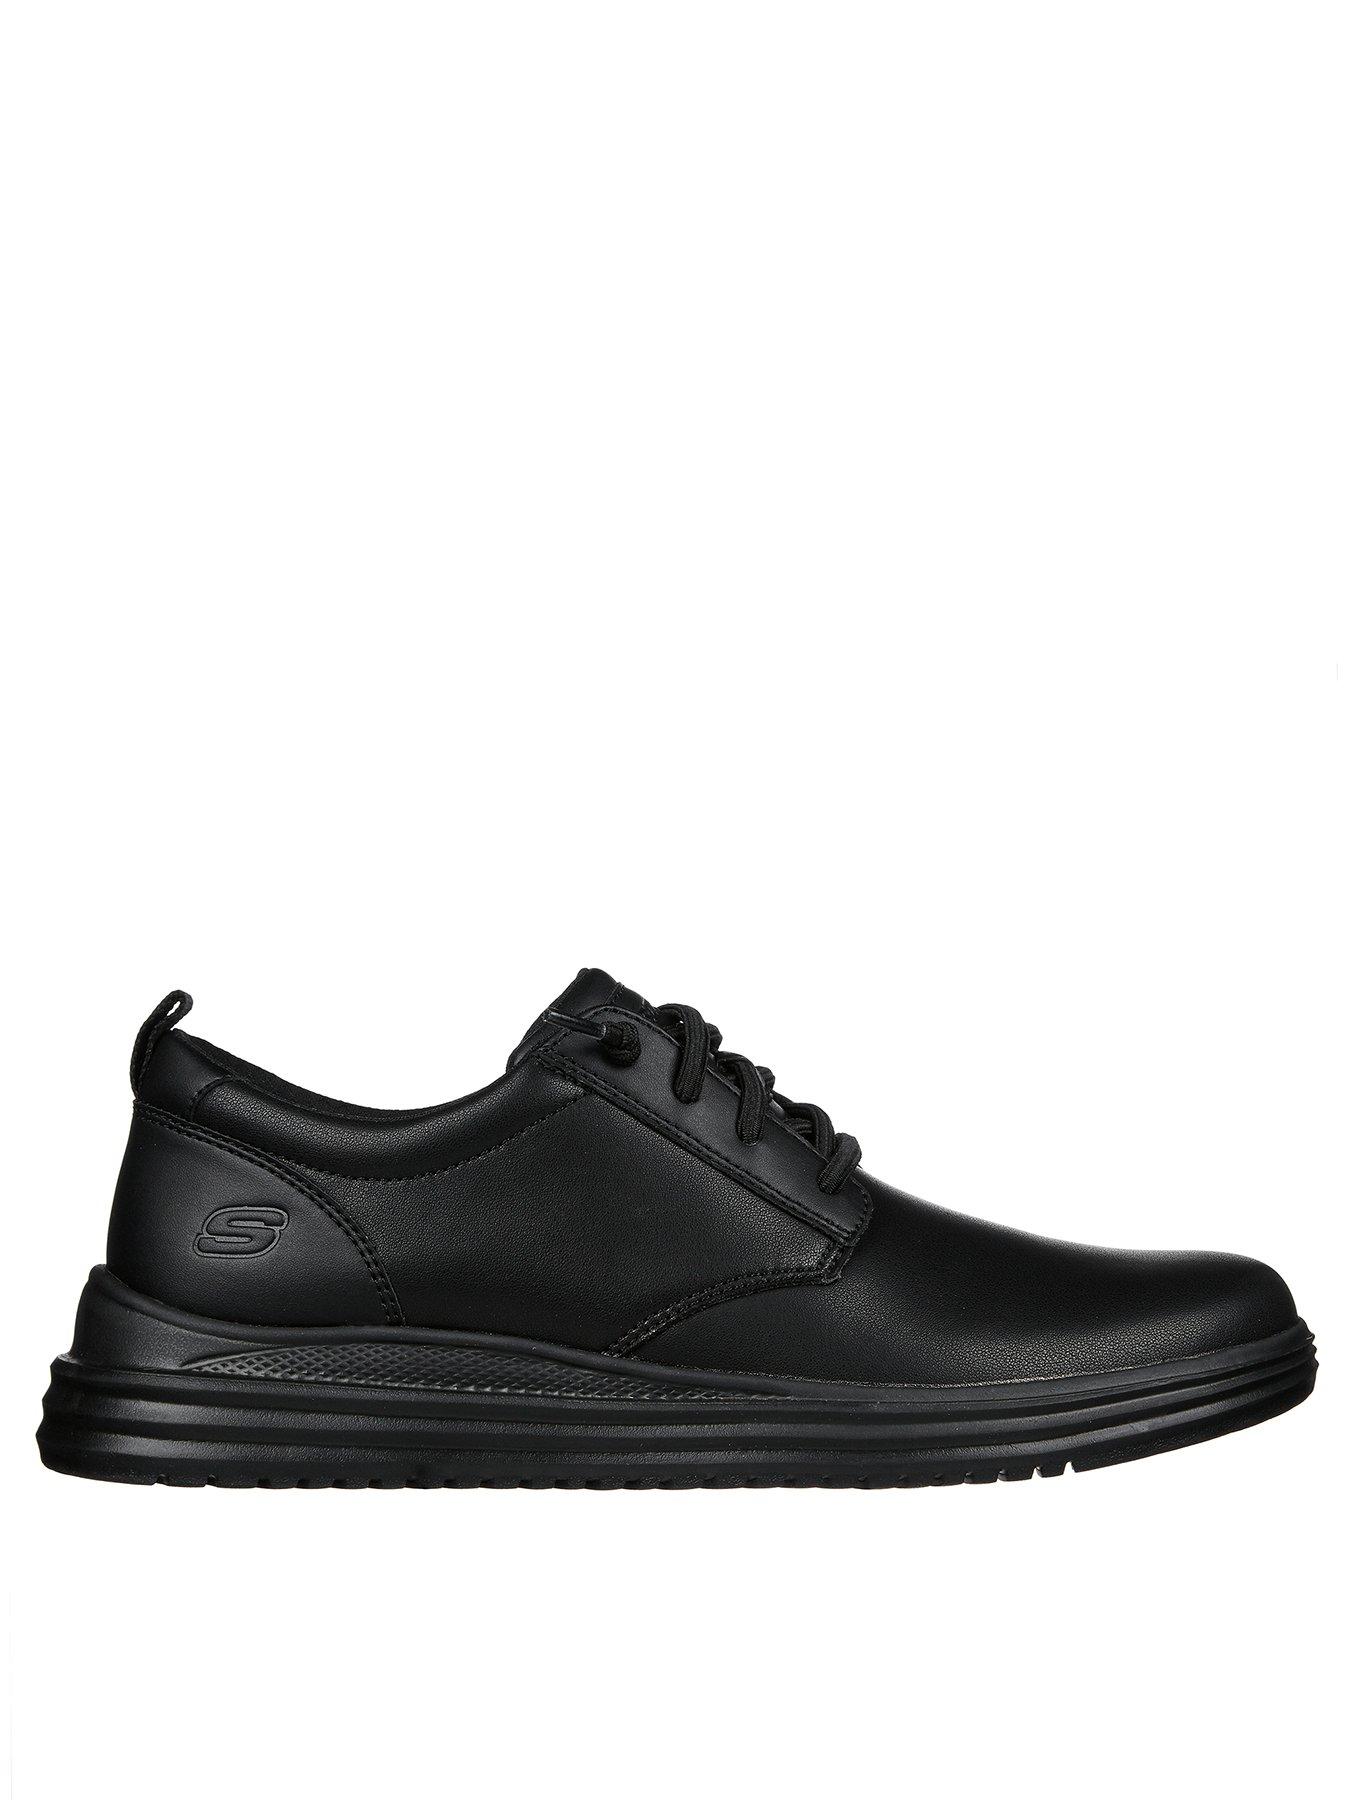 Skechers Proven Low Profile Shoes | very.co.uk